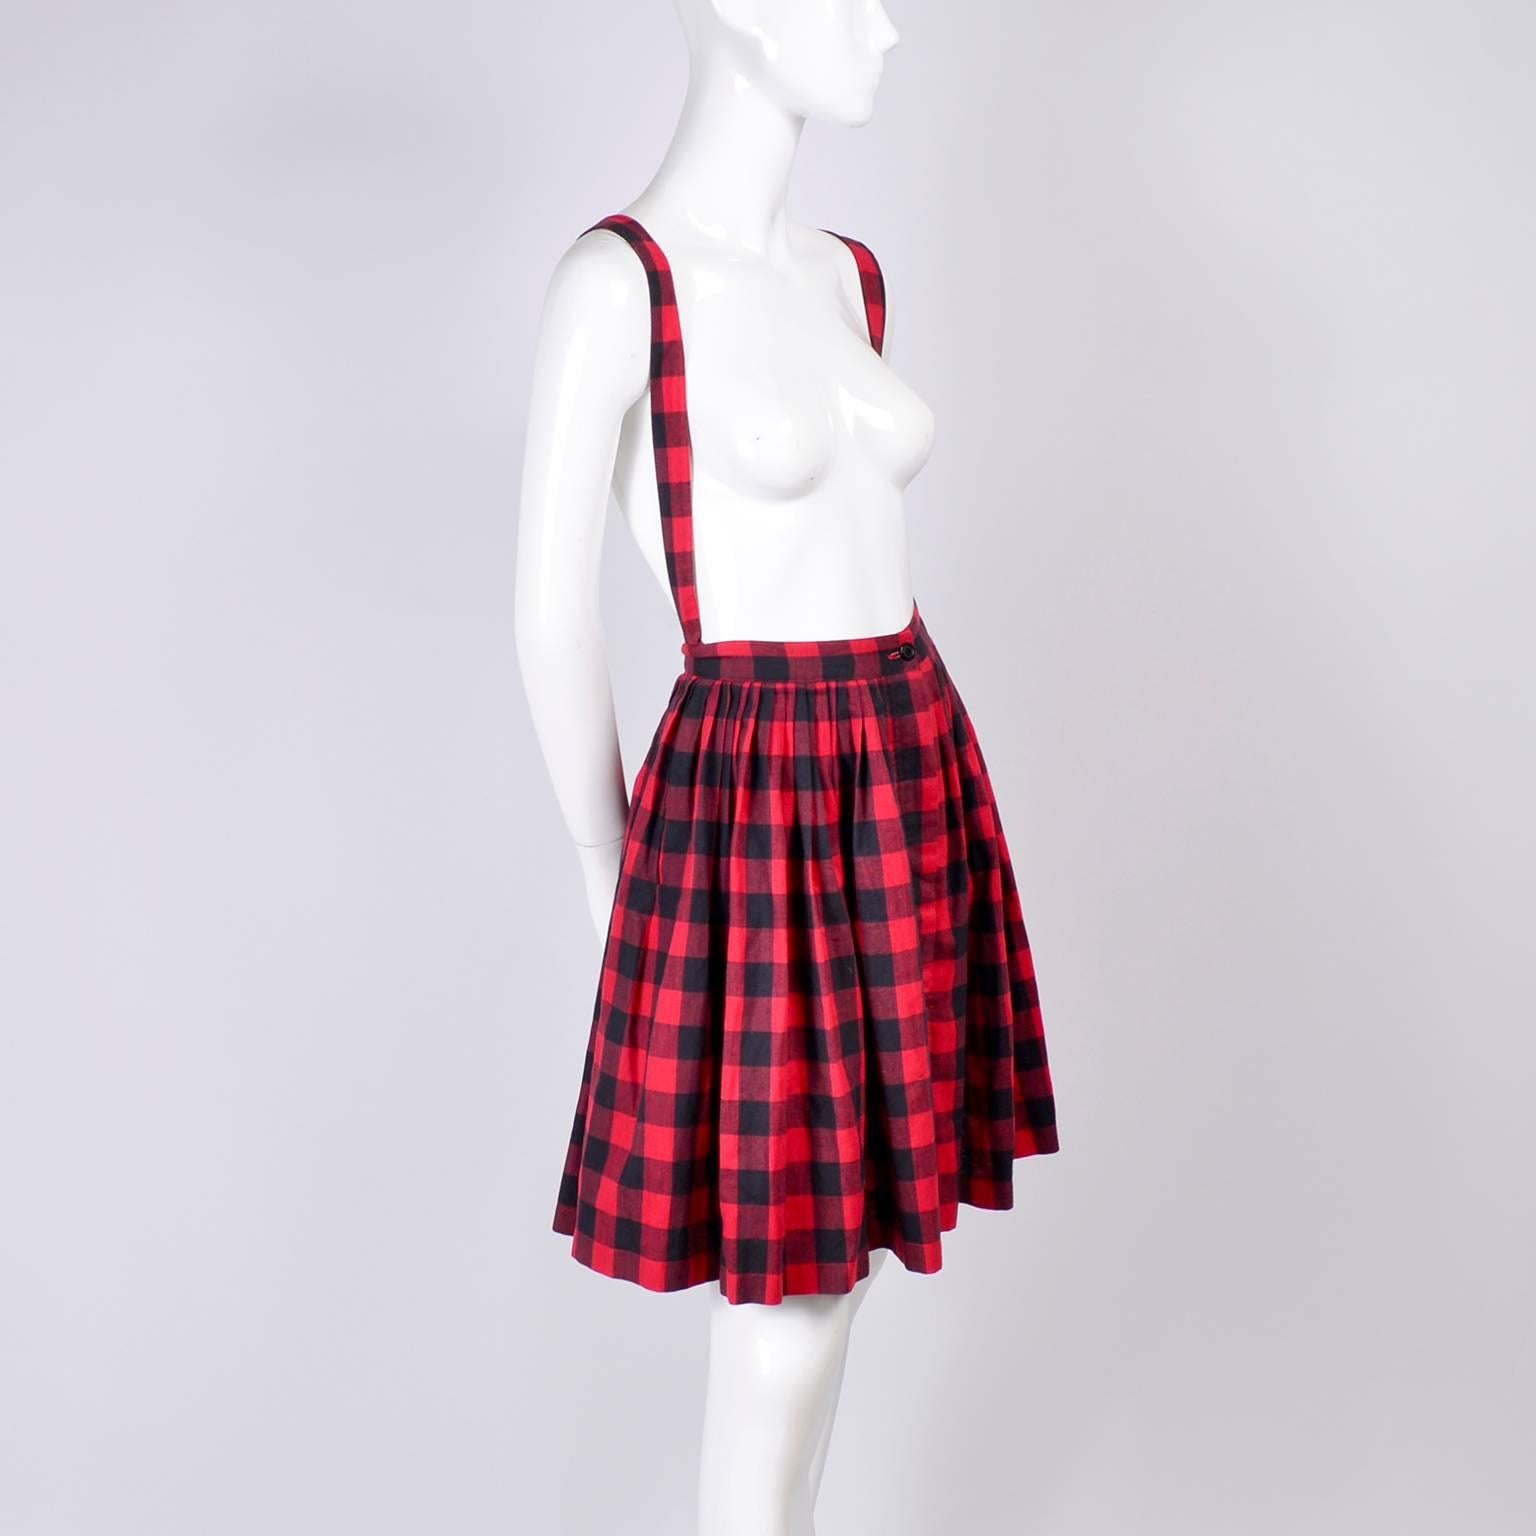 Norma Kamali is one of our favorites so we really love this vintage 1980s red and black cotton plaid skirt with removable suspenders. You can wear this with a fun blouse or a simple tee shirt.  The skirt has side slit pockets and the suspenders have